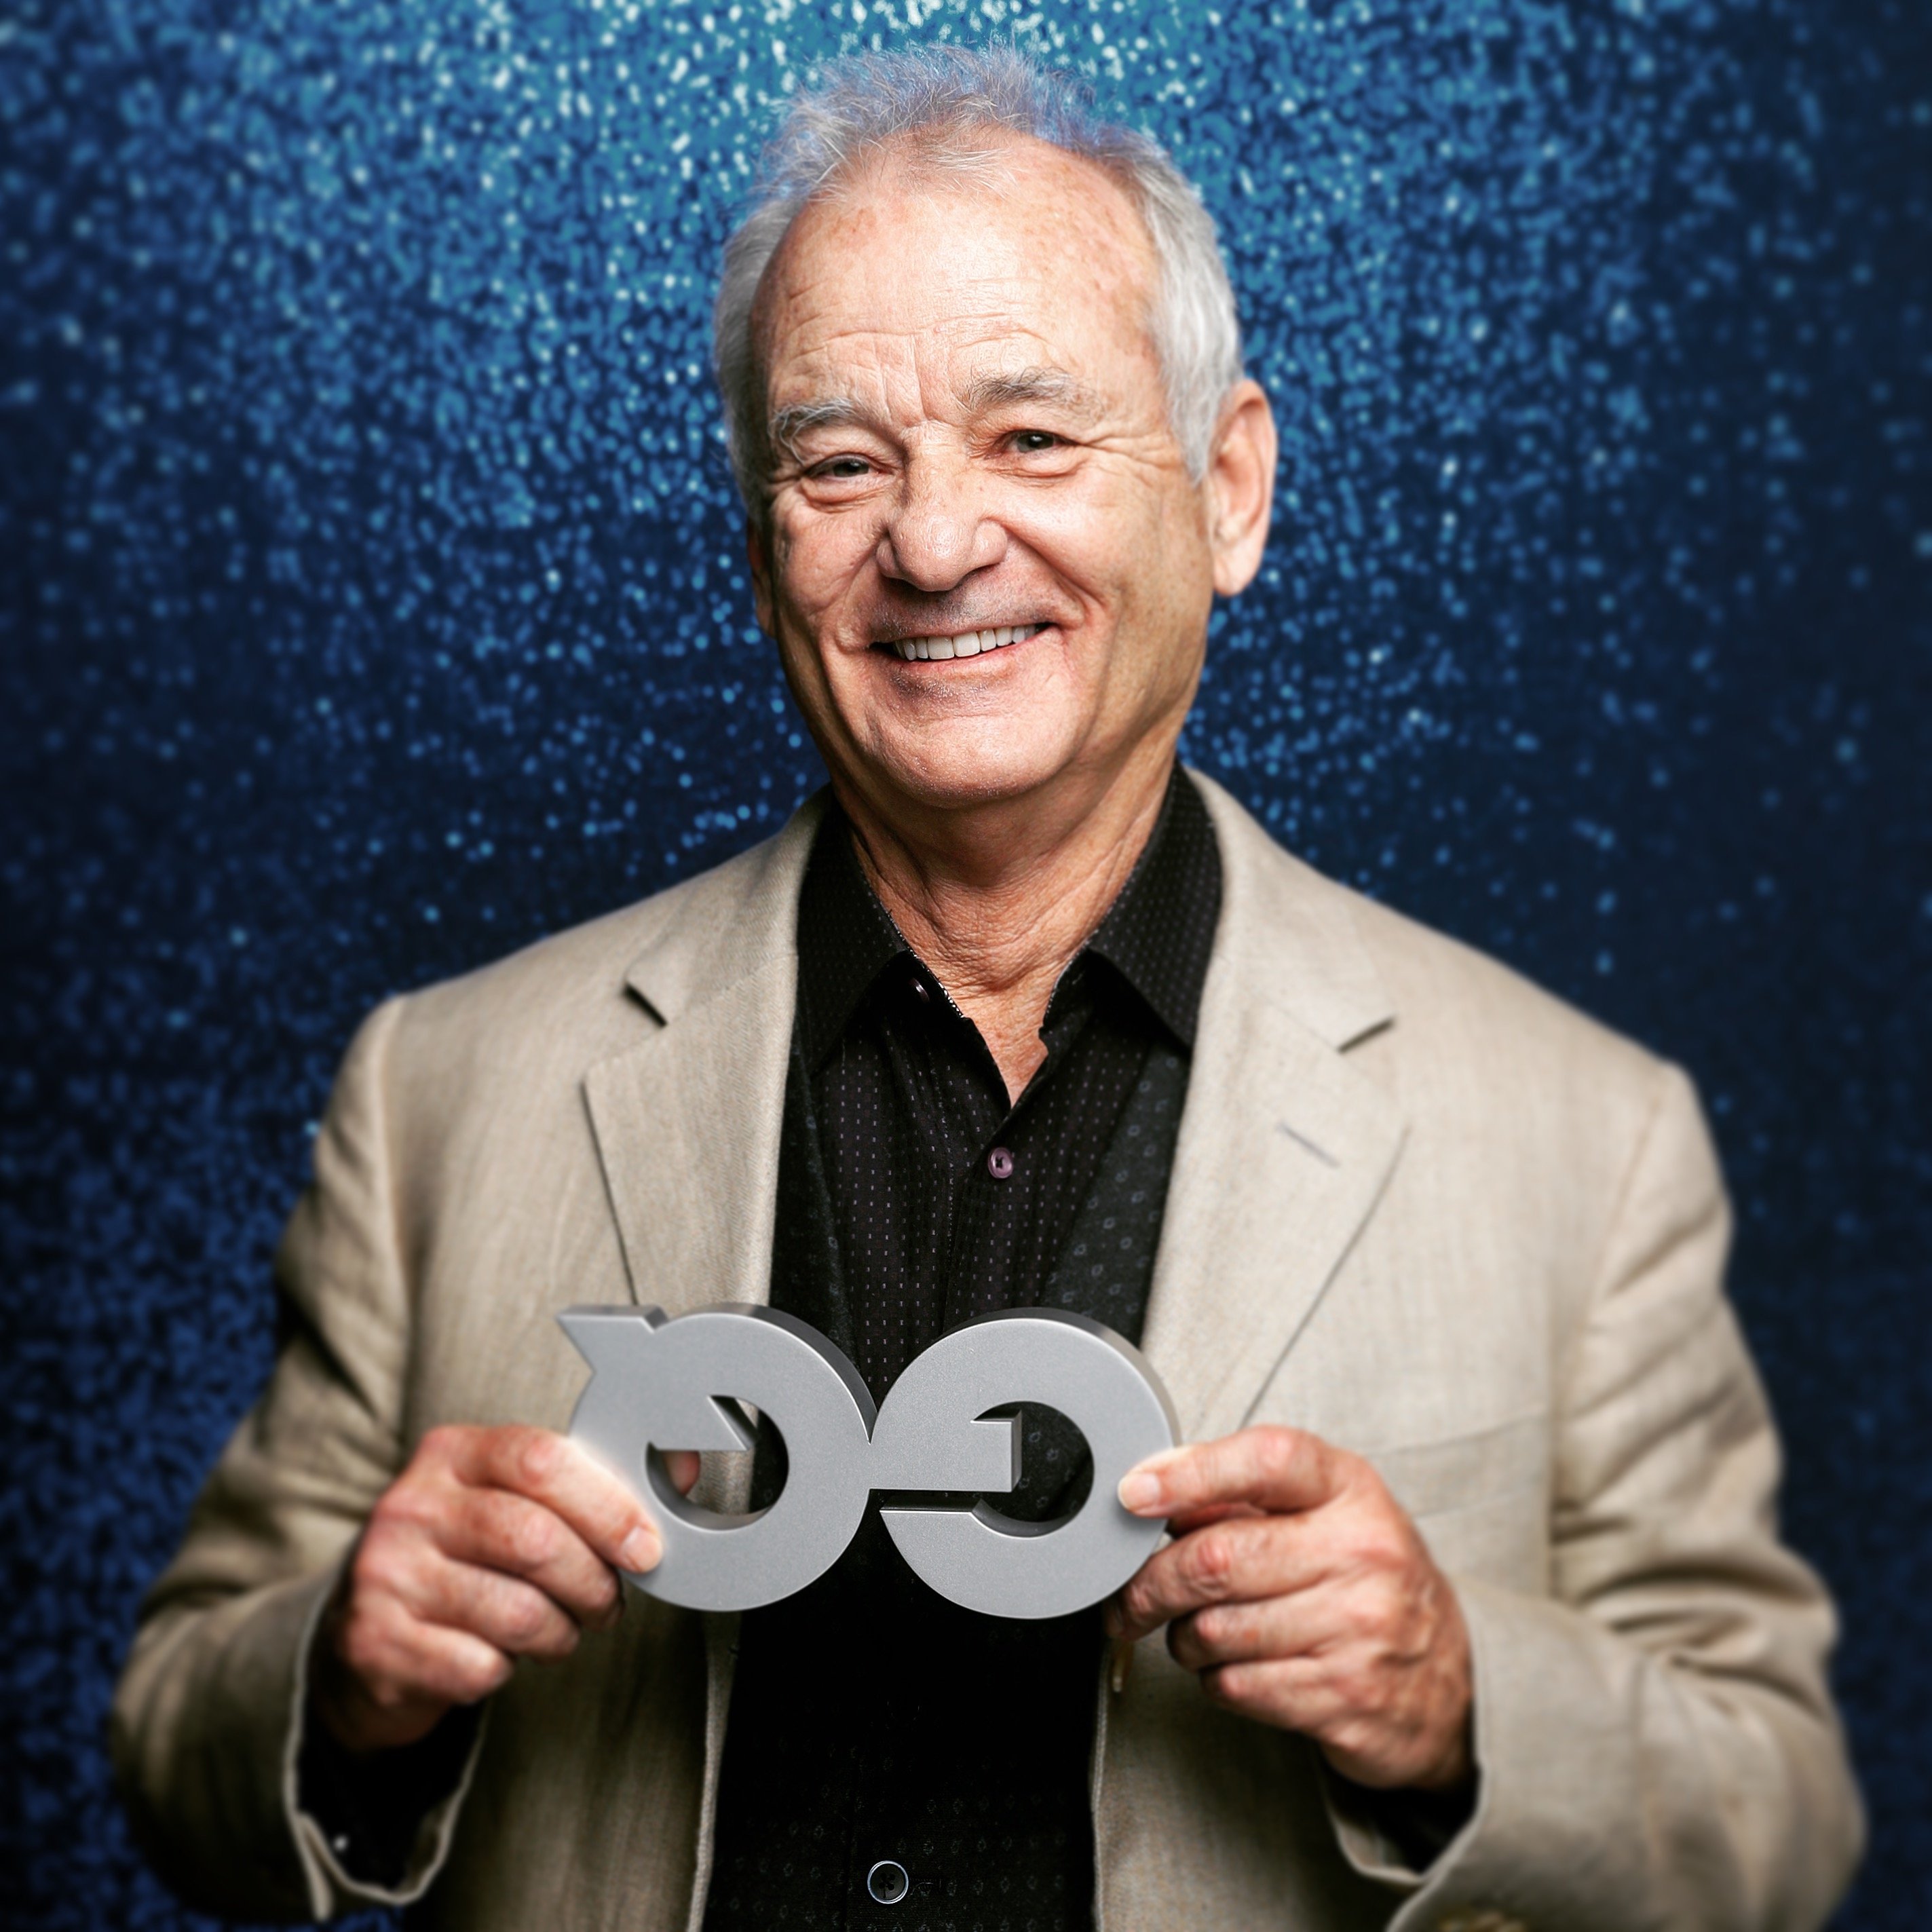 Bill Murray poses at the GQ Men of the Year Awards in Berlin, Germany on November 10, 2016 | Photo: Getty Images